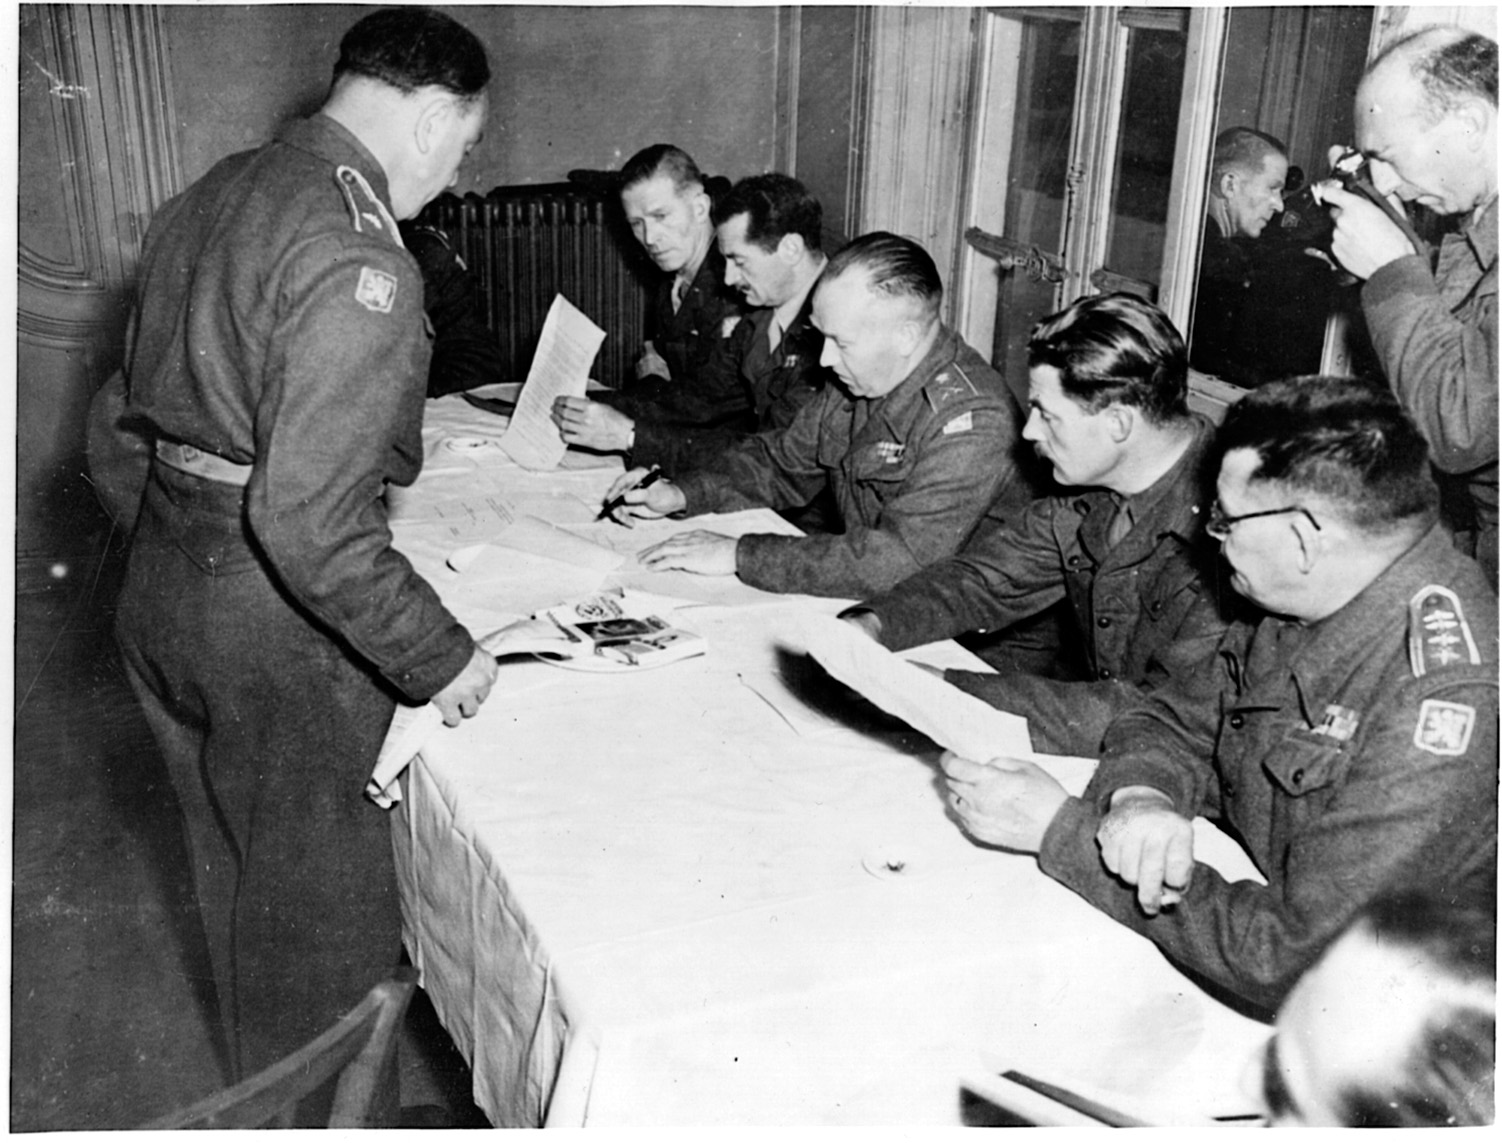 British officers discuss the terms of surrender to be offered to the German command in the war-ravaged French city of Dunkirk. Located on the English Channel, Dunkirk had been the scene of a humiliating defeat and the evacuation of the British Expeditionary Force from the continent of Europe in 1940.